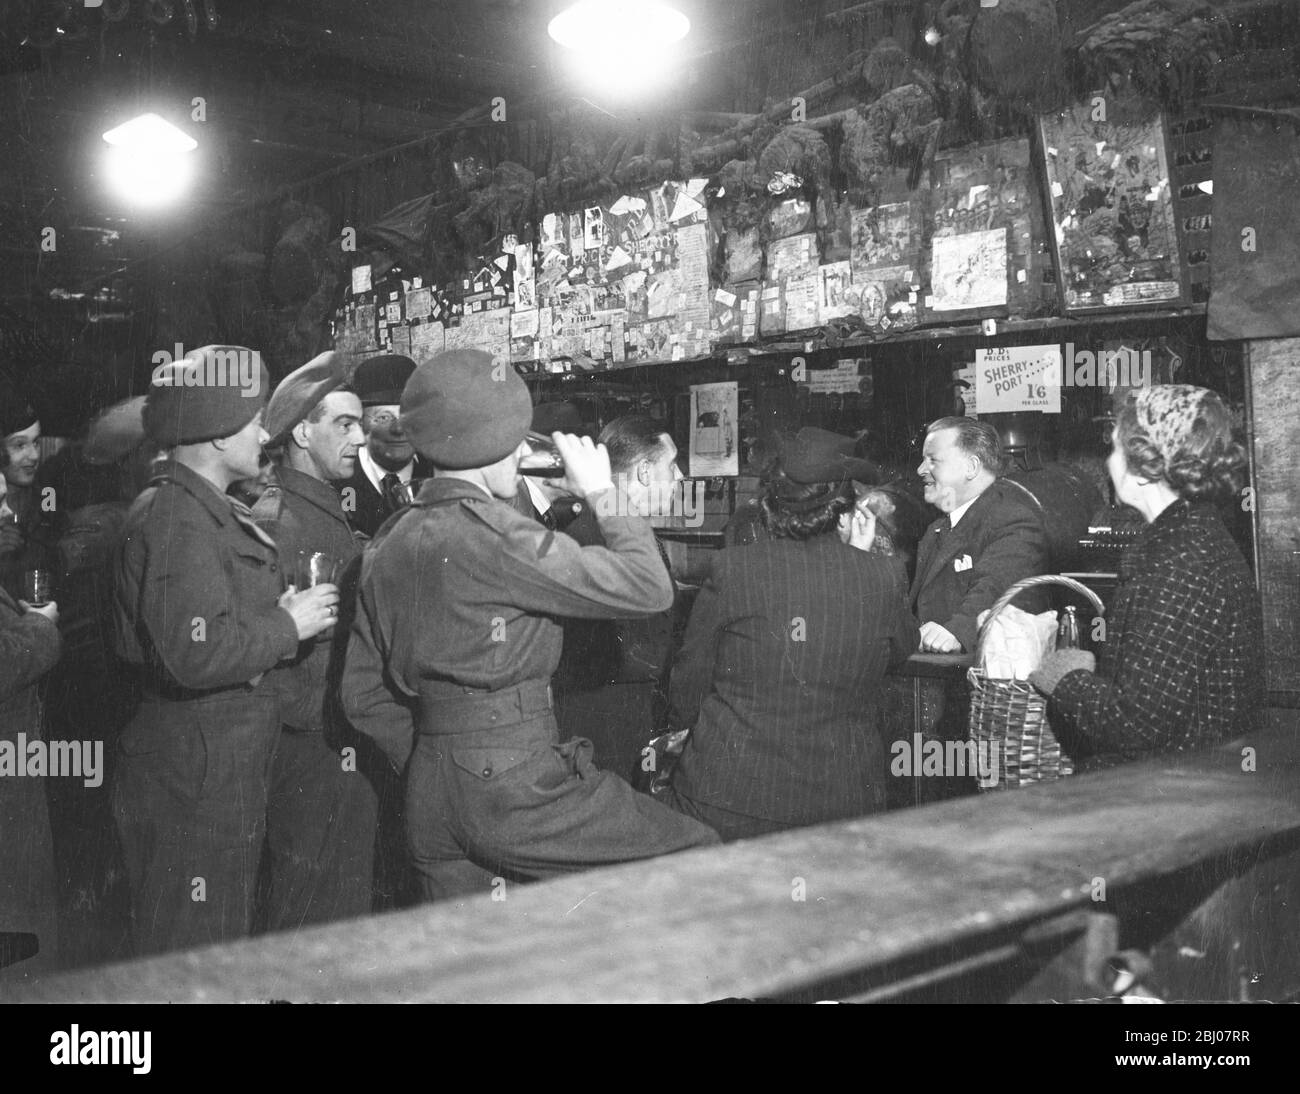 Royal Army Service Corps Soldiers in a pub Stock Photo